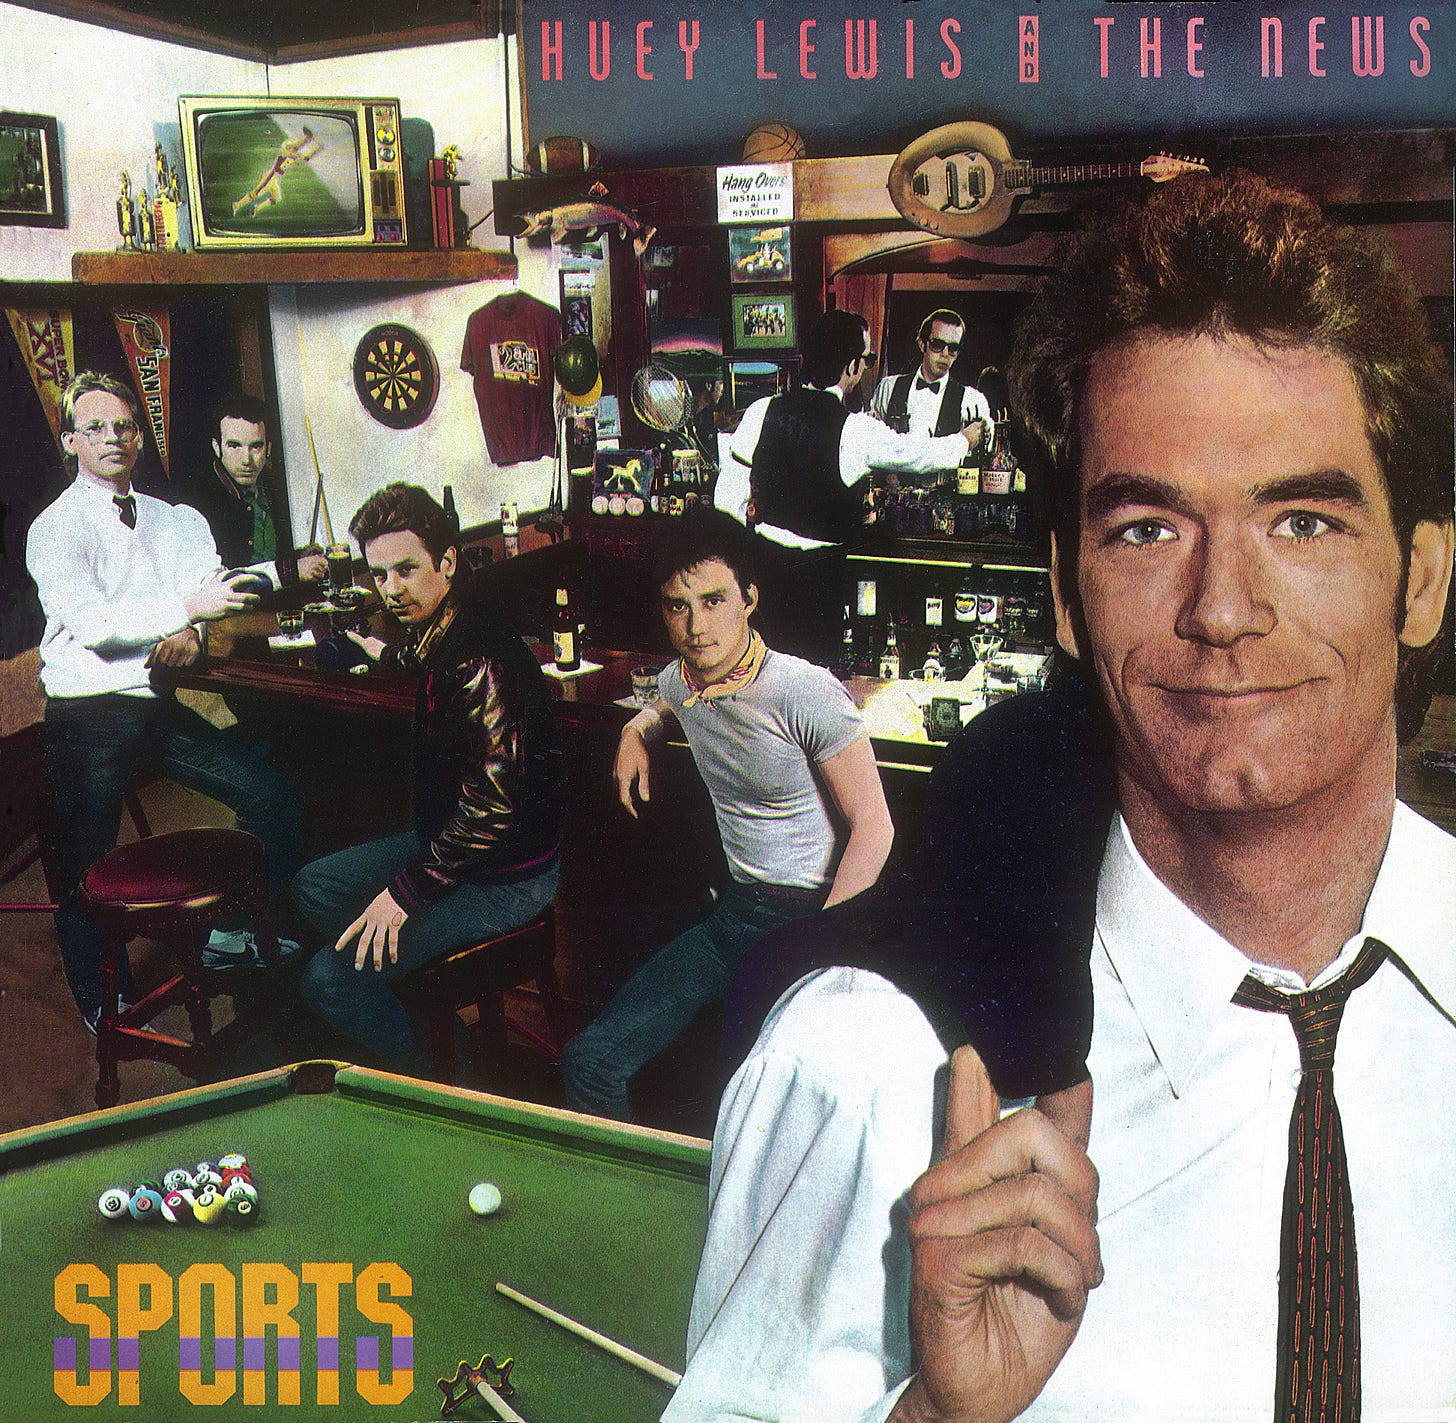 The album "Sports" by Huey Lewis & The News